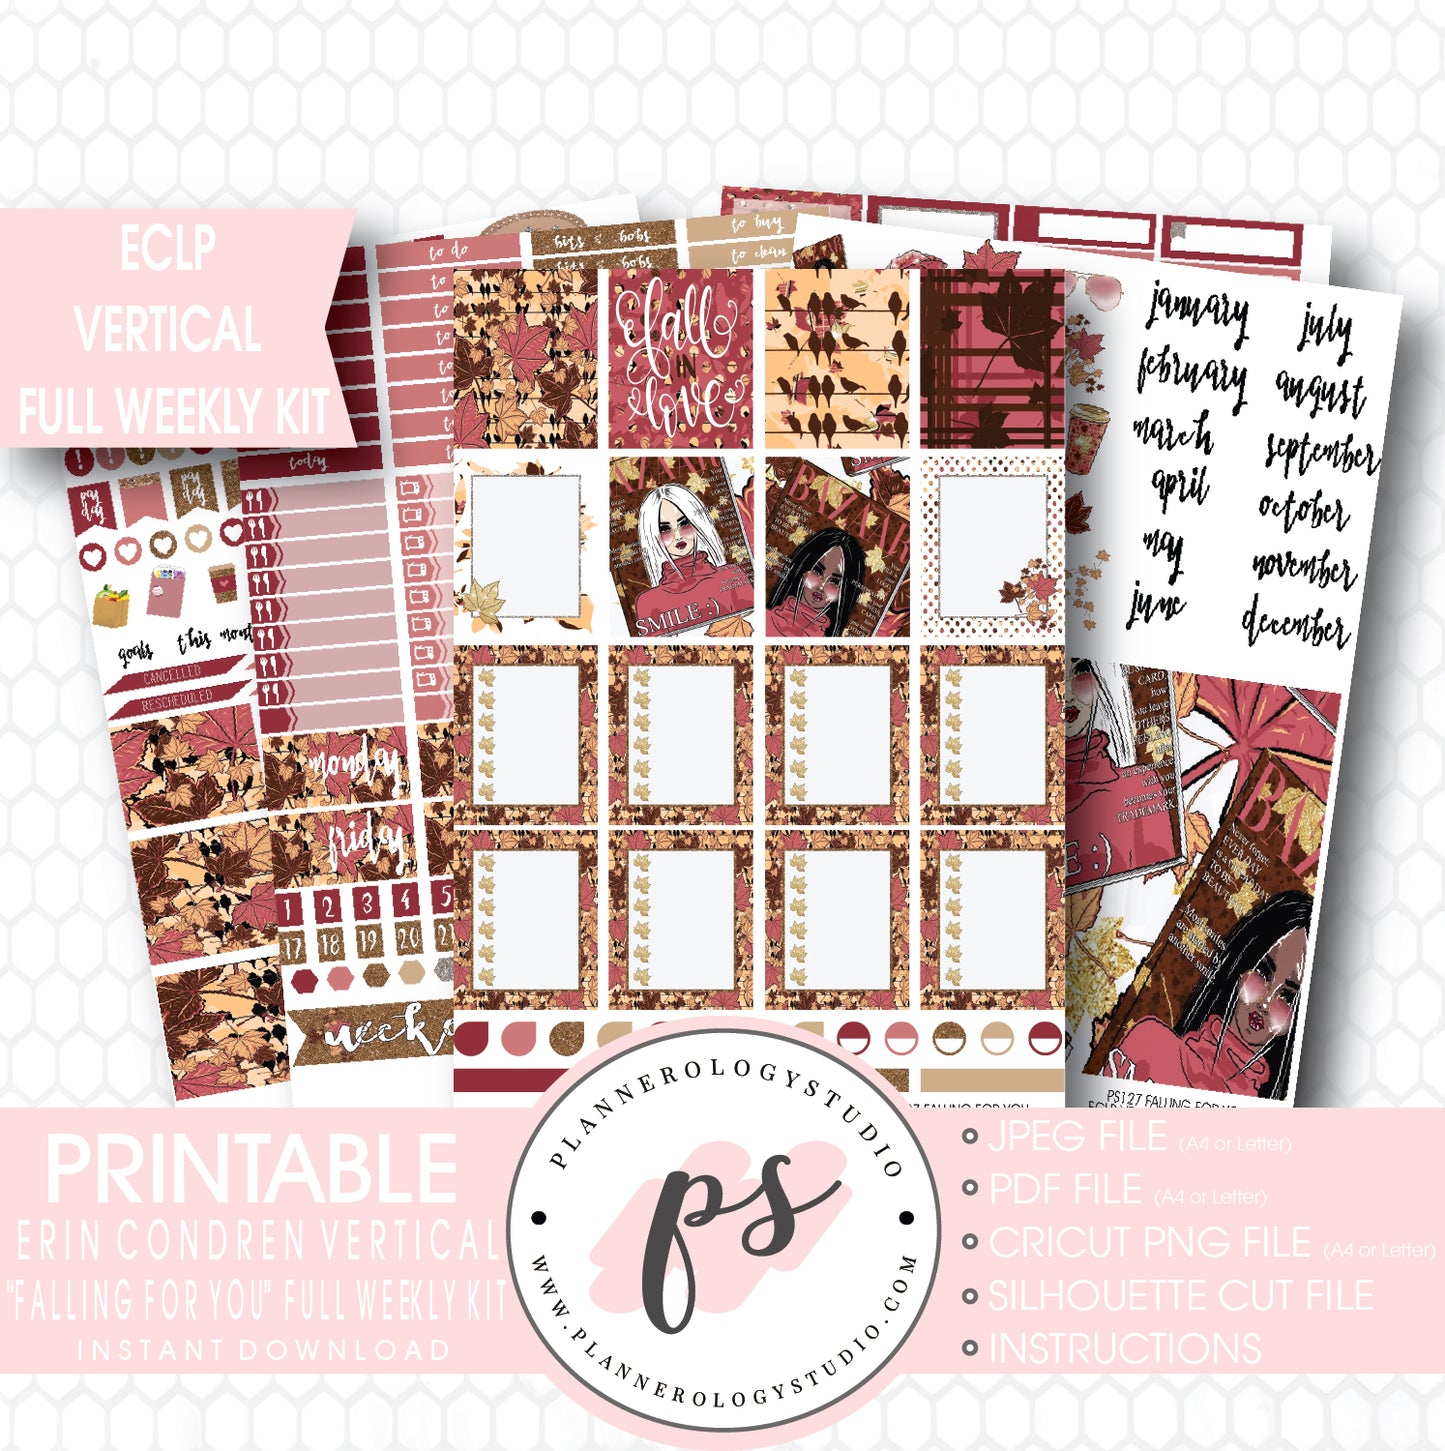 Falling For You Full Weekly Kit Printable Planner Stickers (for use with ECLP Vertical) - Plannerologystudio